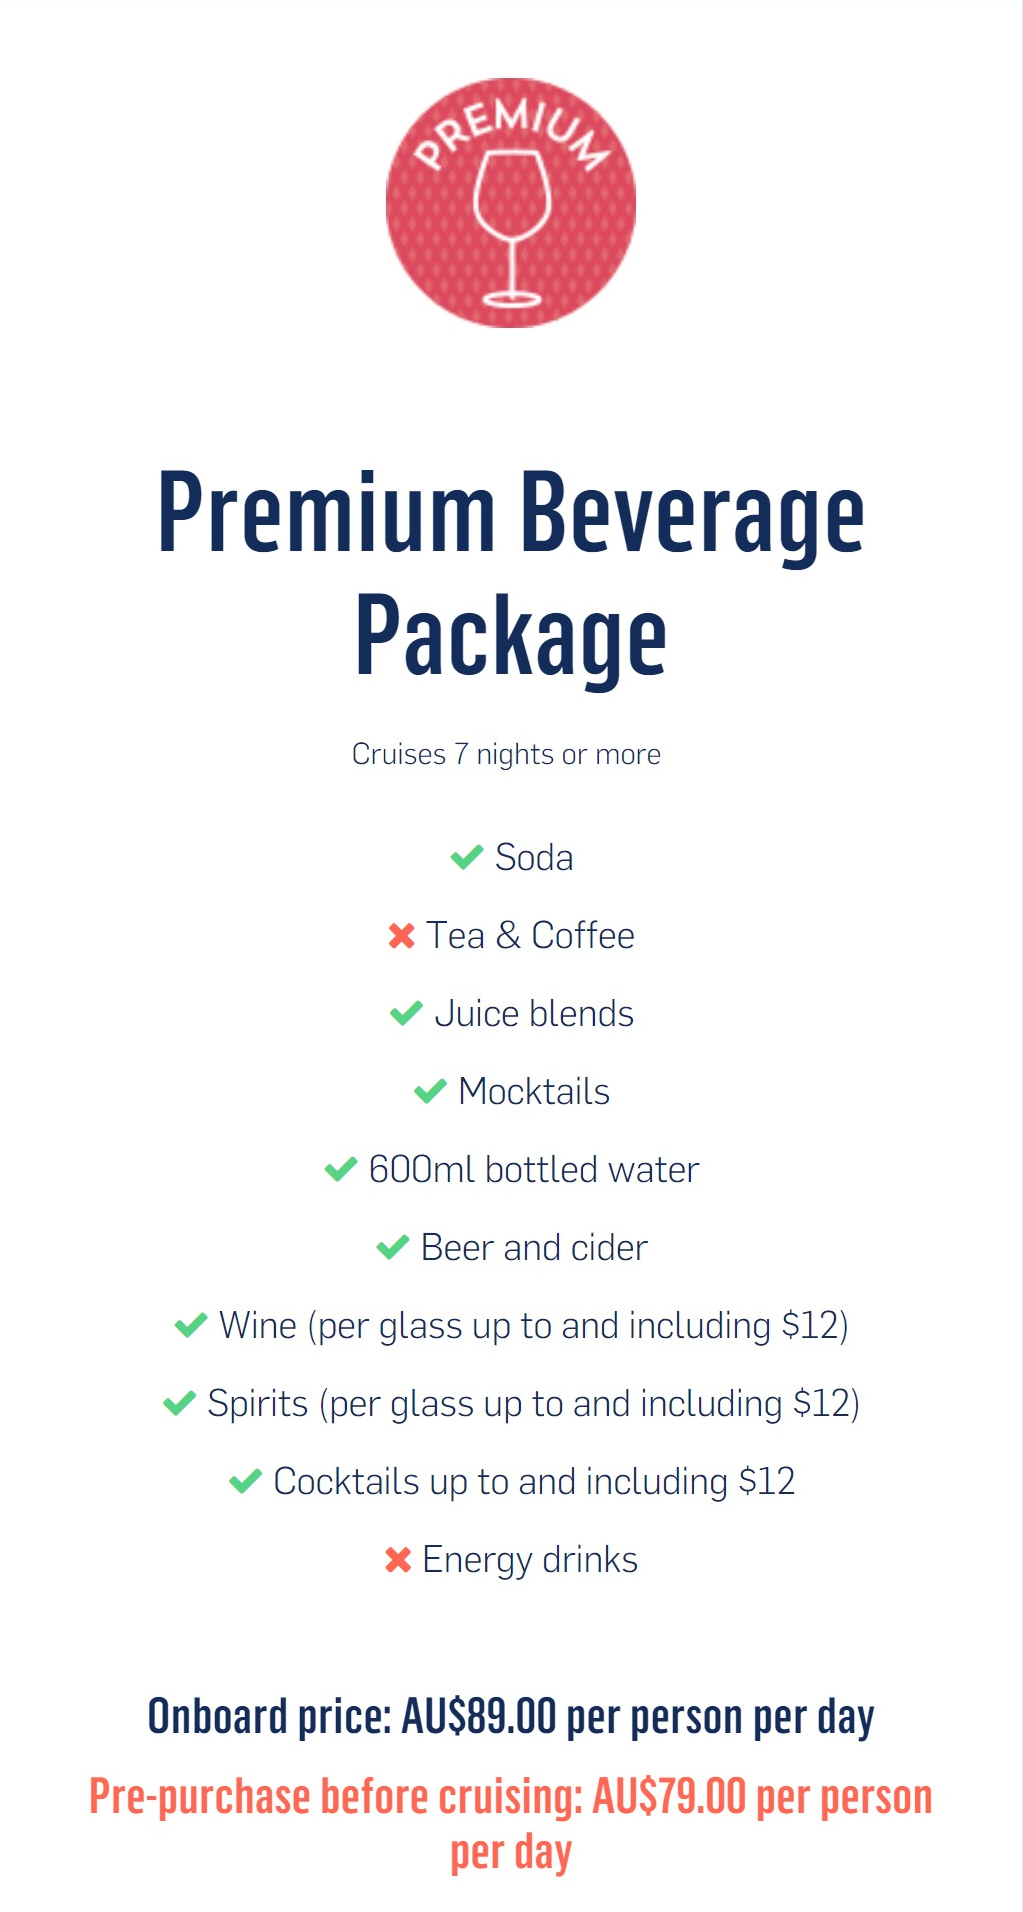 P&O drinks package